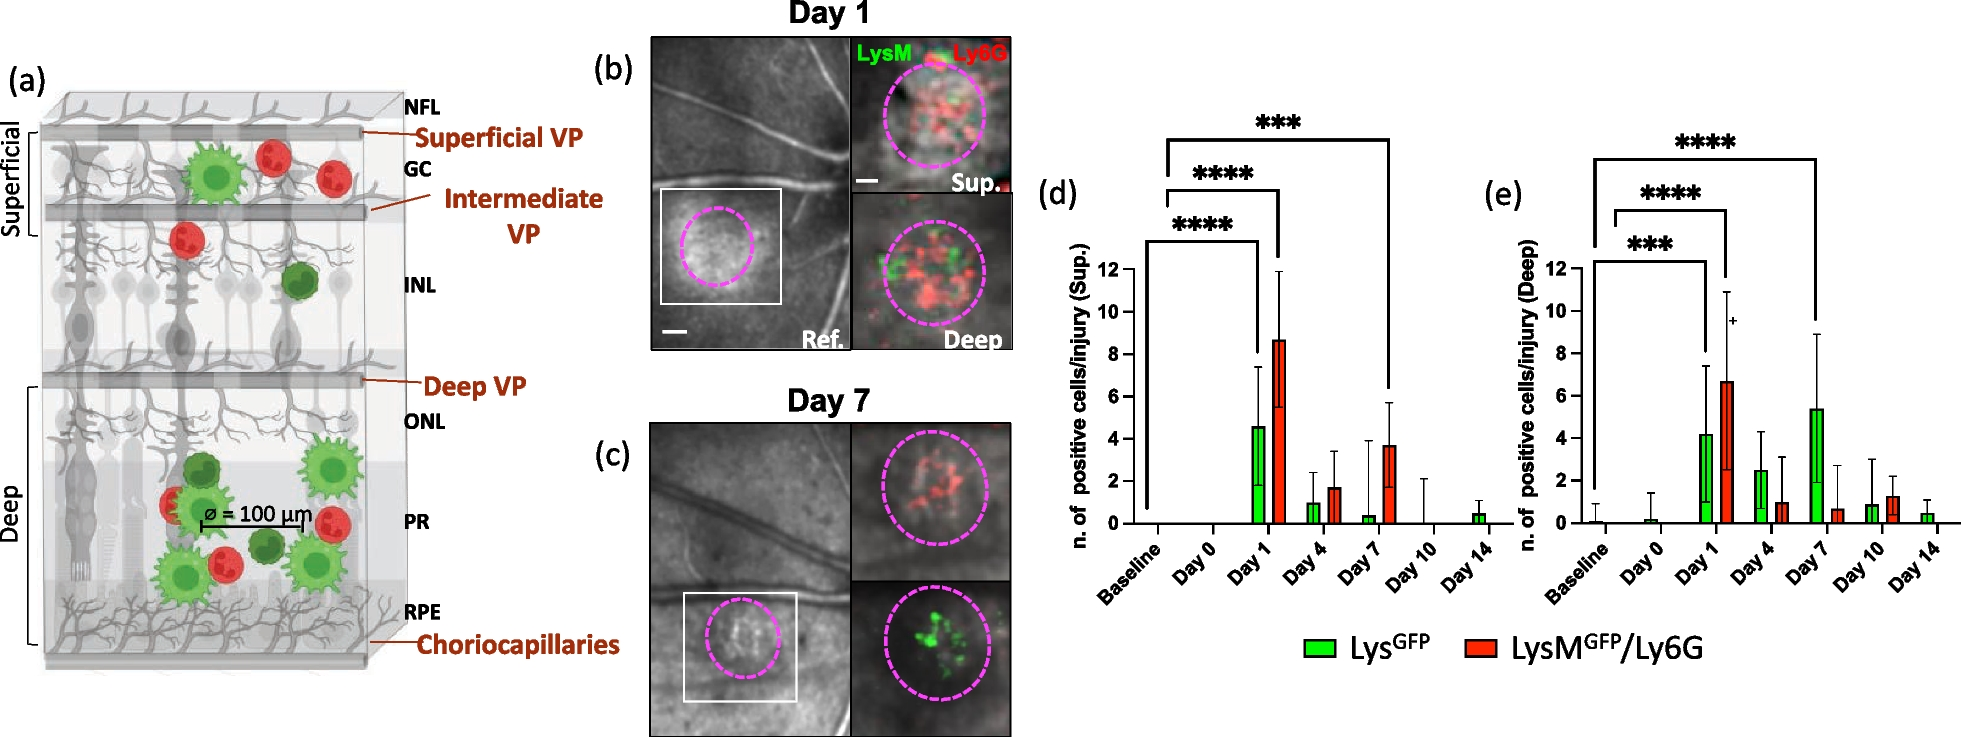 Macrophages coordinate immune response to laser-induced injury via extracellular traps